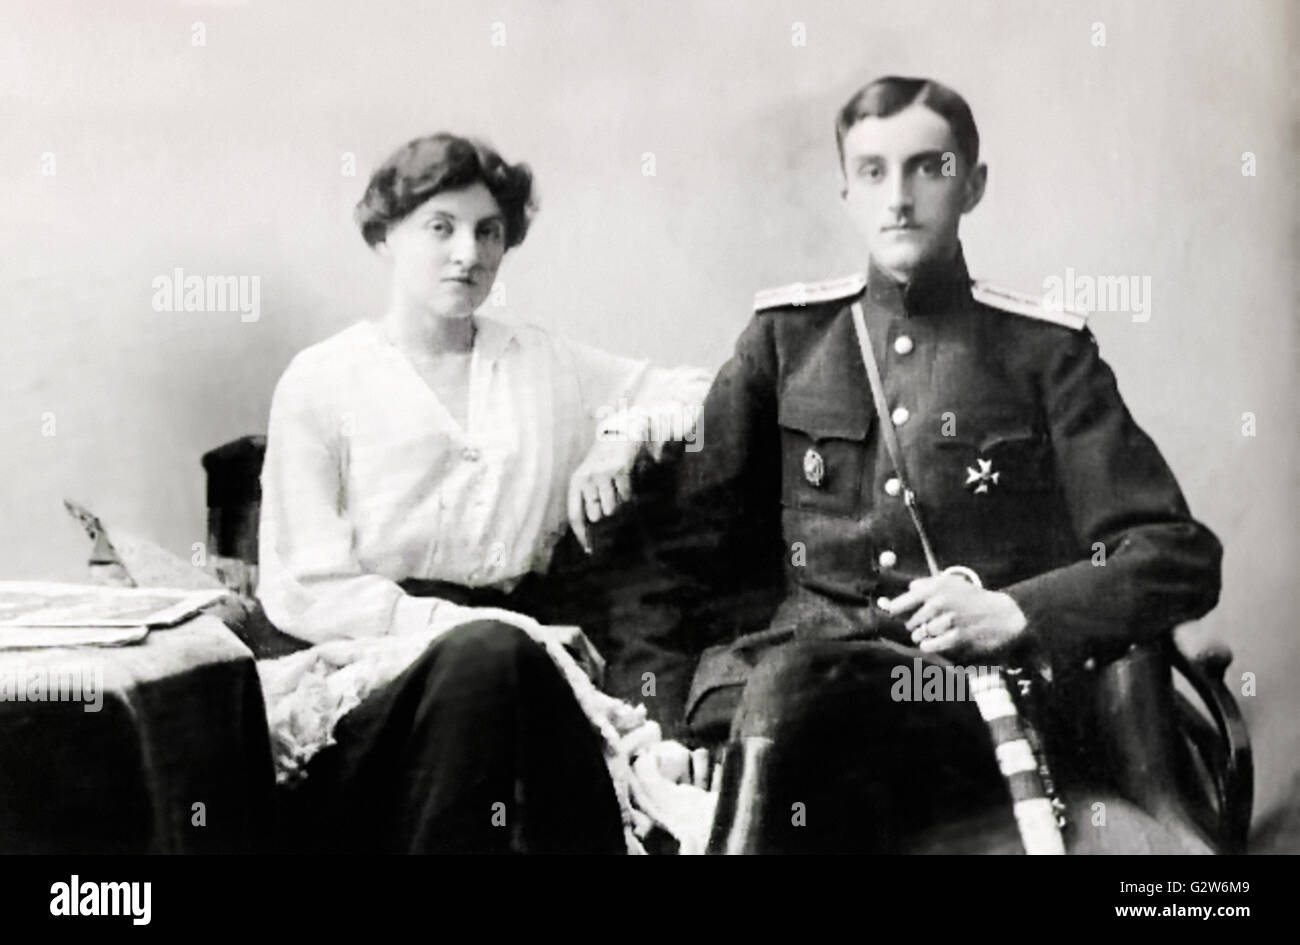 Princess Nadejda Petrovna of Russia (1898-1988) and her husband Prince Nicholas Vladimirovich Orlov (1891–1961) in a studio photograph taken in Crimea after the February revolution of 1917. They were both rescued from Yalta in 1919 by the HMS Marlborough and lived the remainder of their lives in exile. Stock Photo